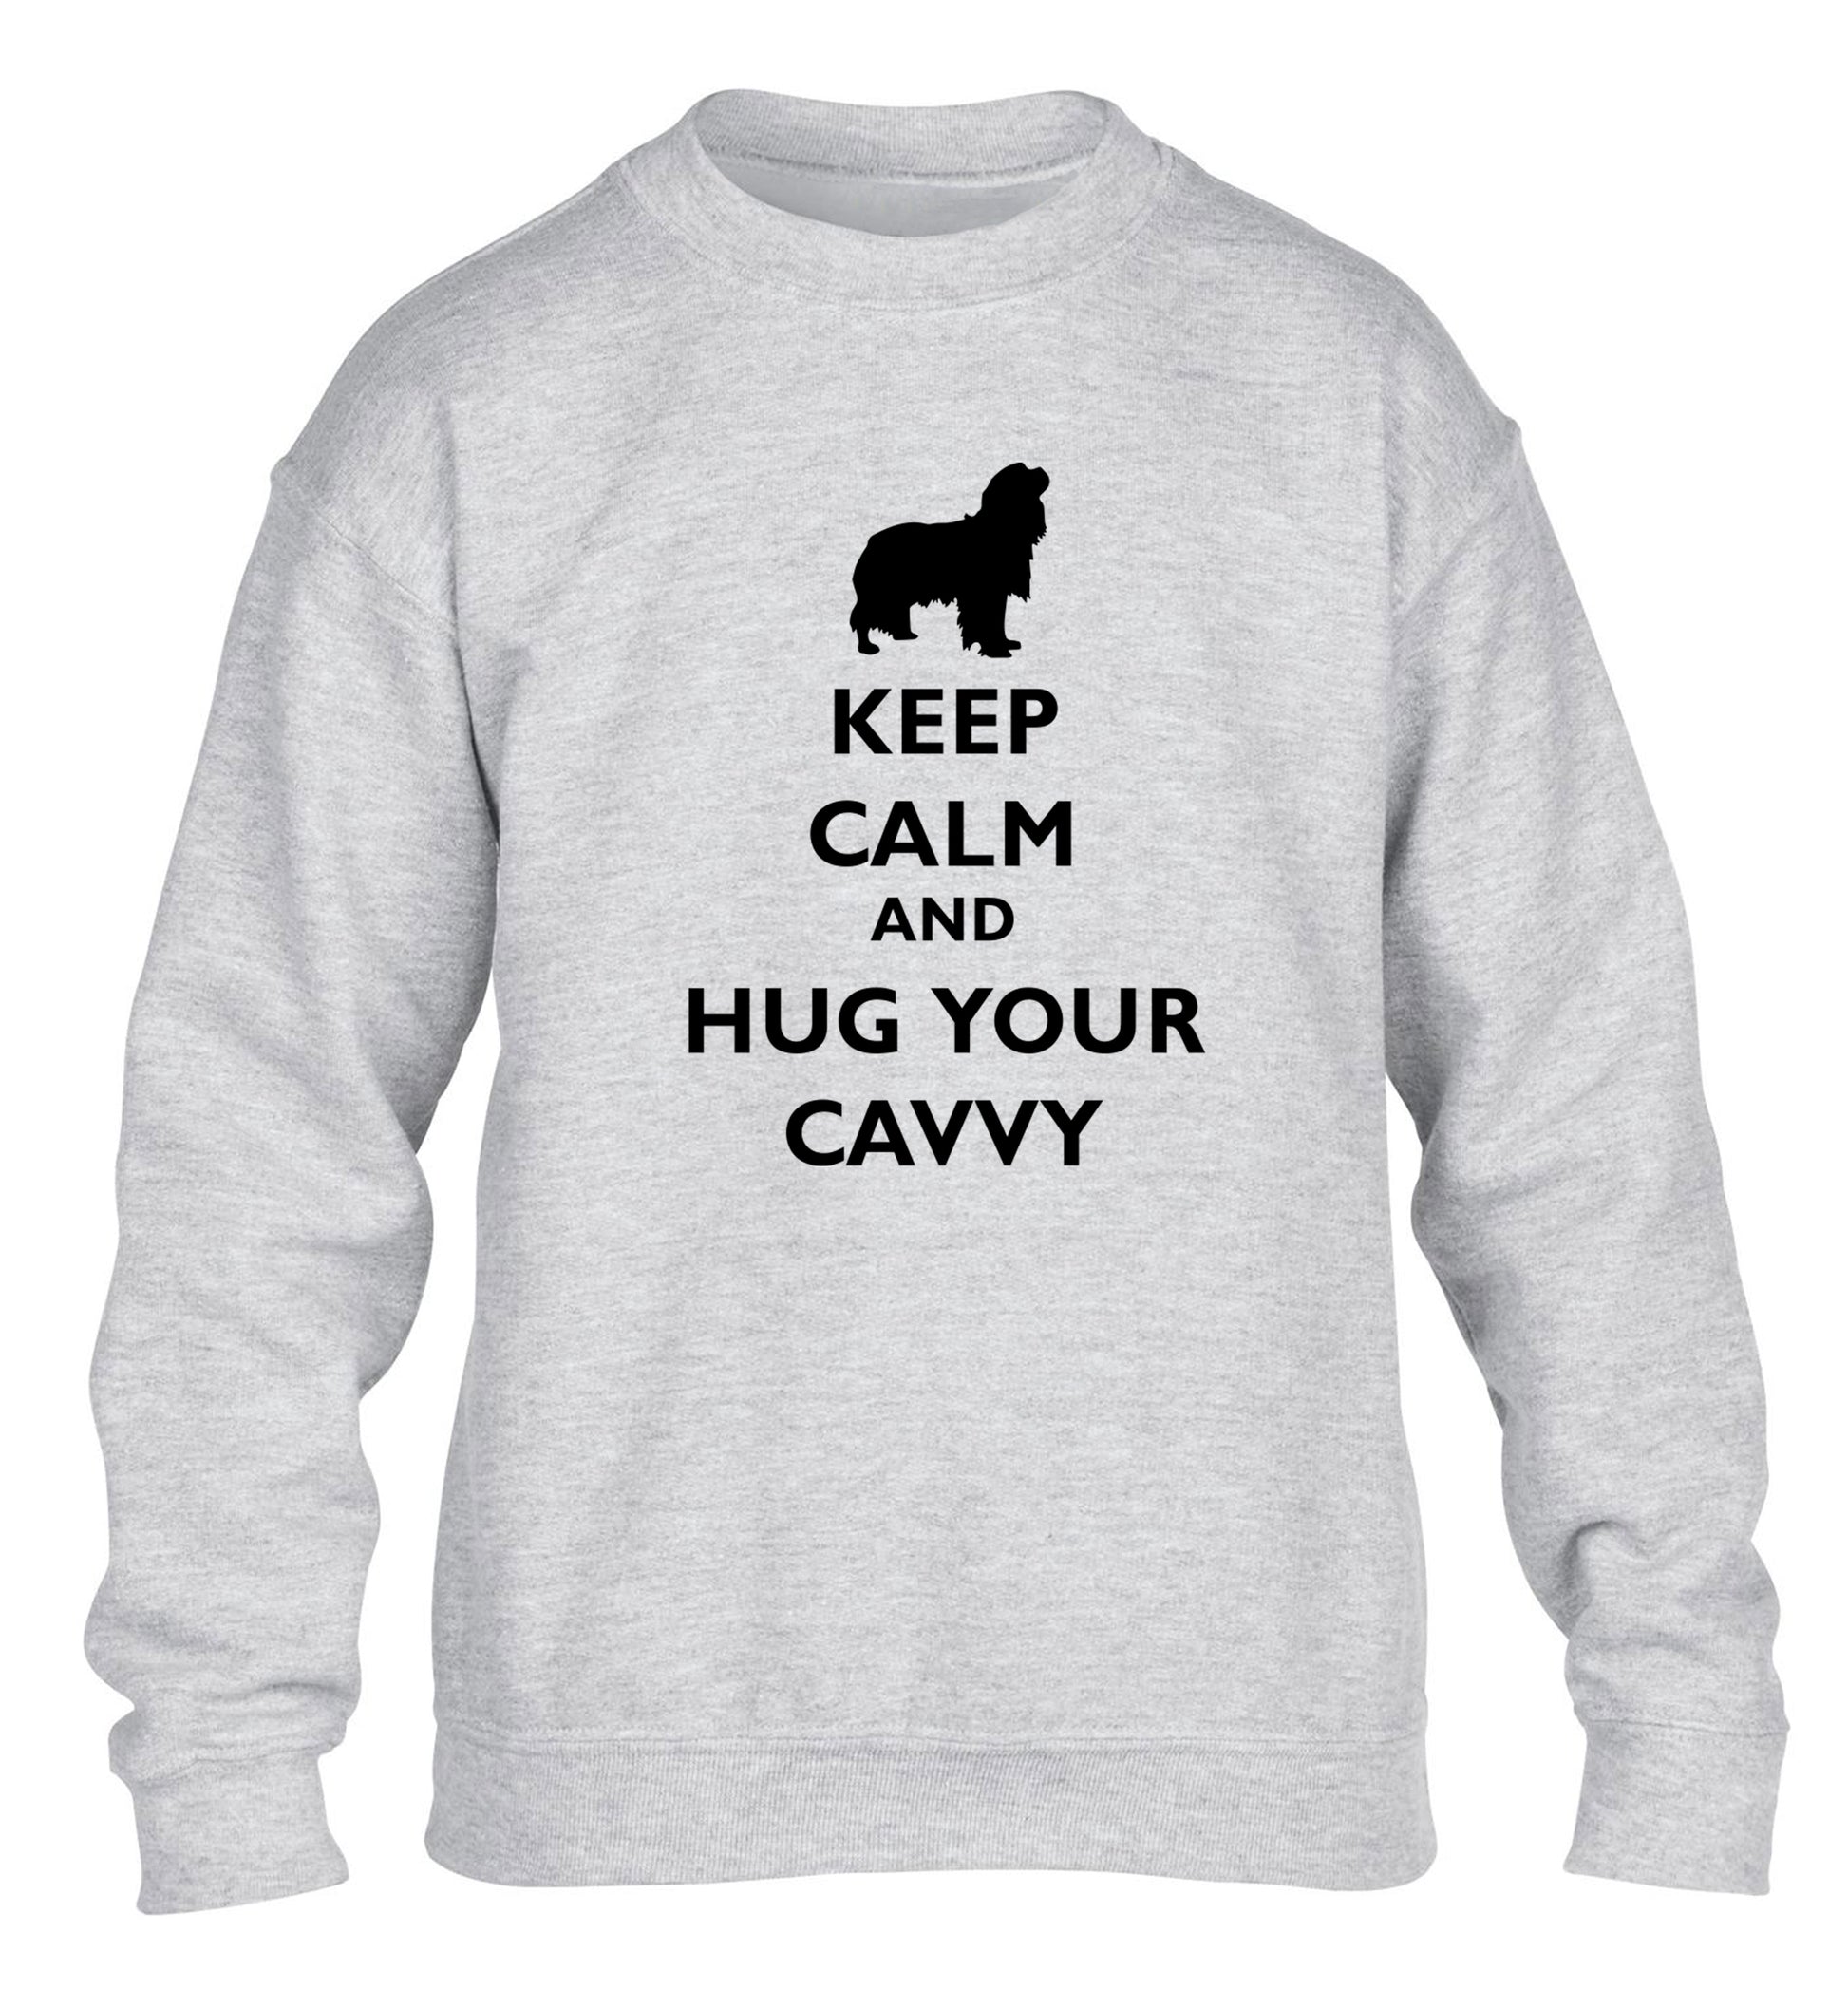 Keep calm and hug your cavvy children's grey sweater 12-13 Years